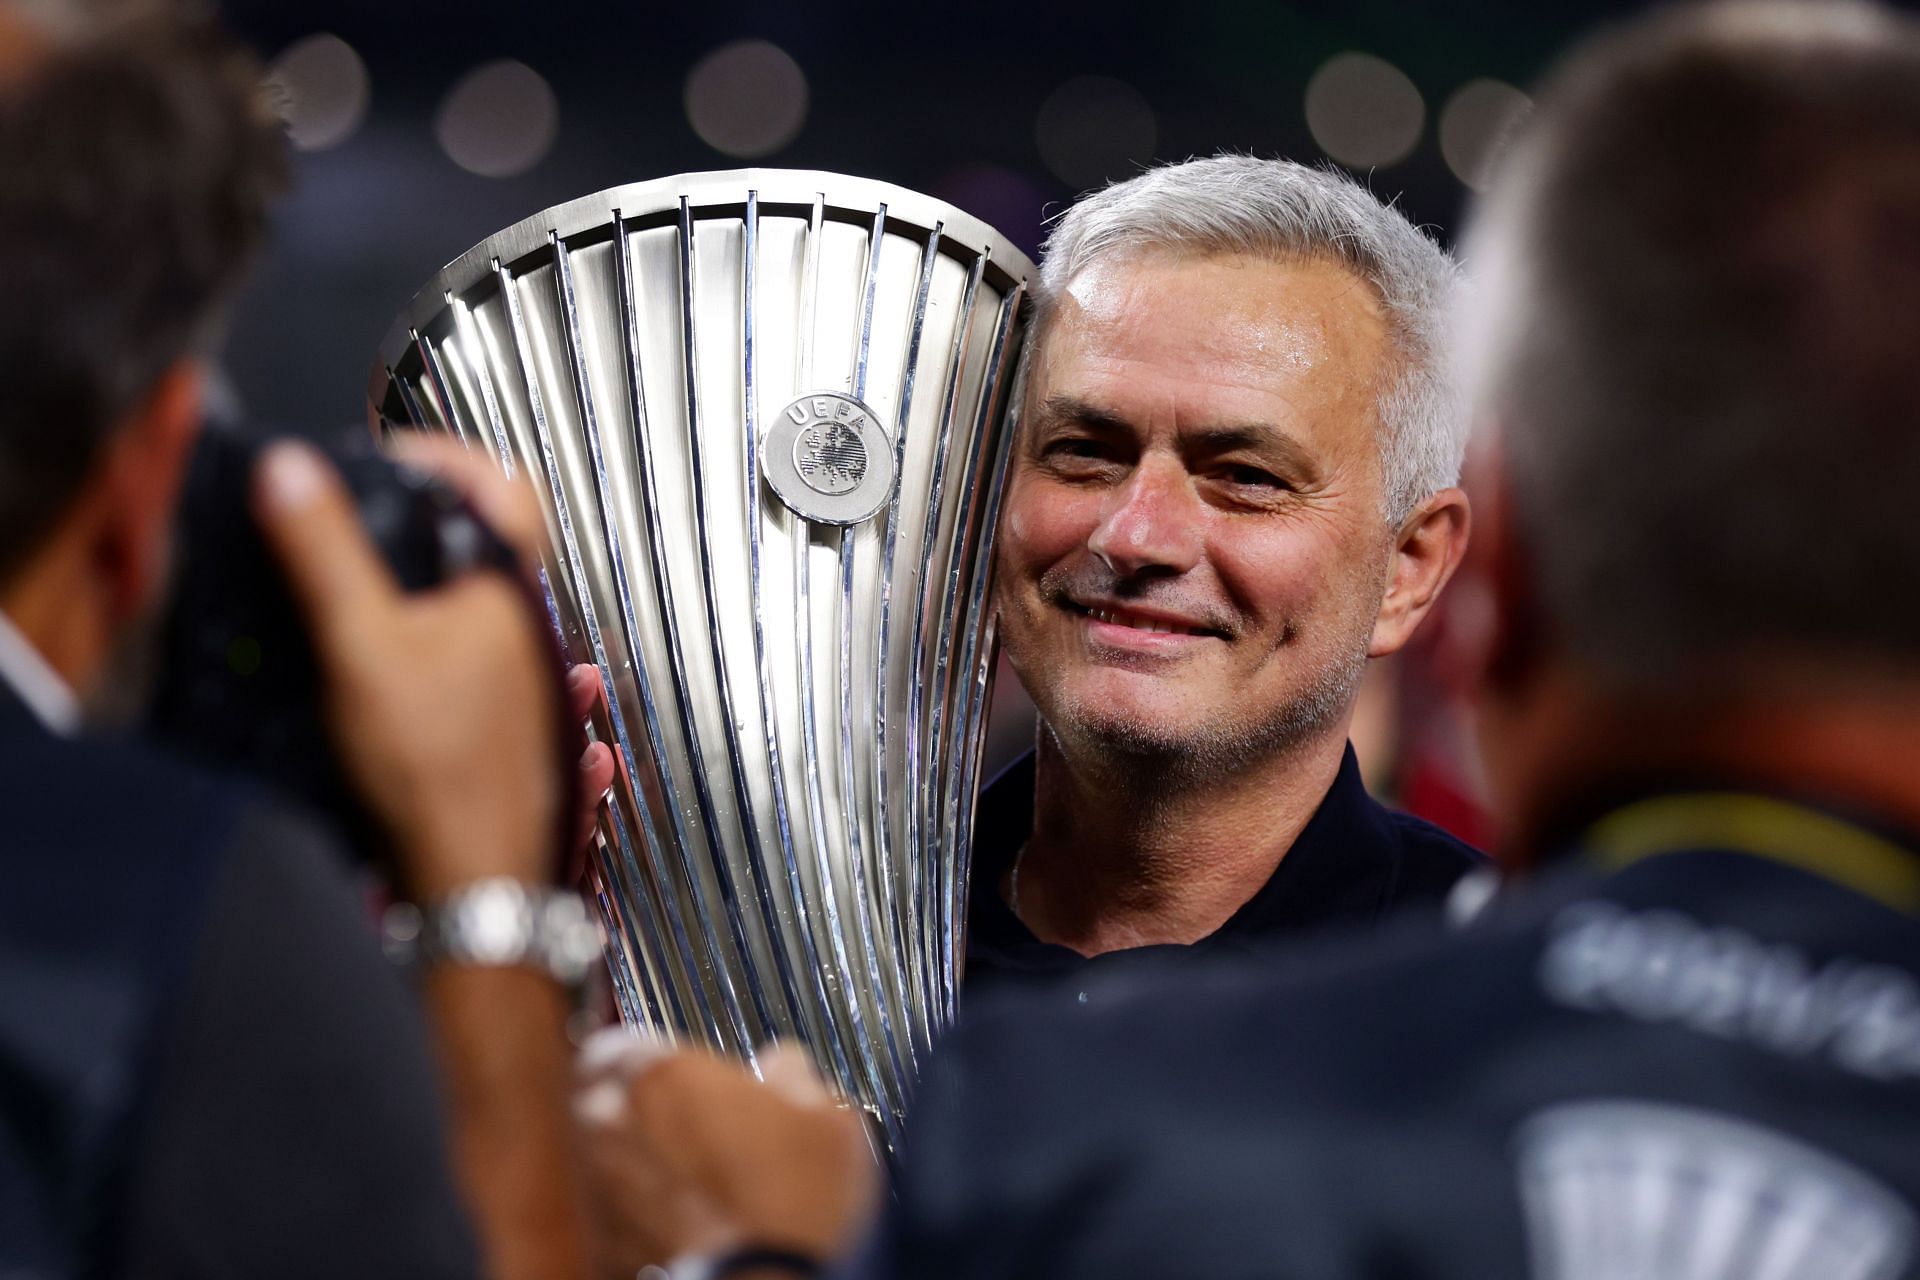 Mourinho has won the Europa Conference League after leaving Tottenham.